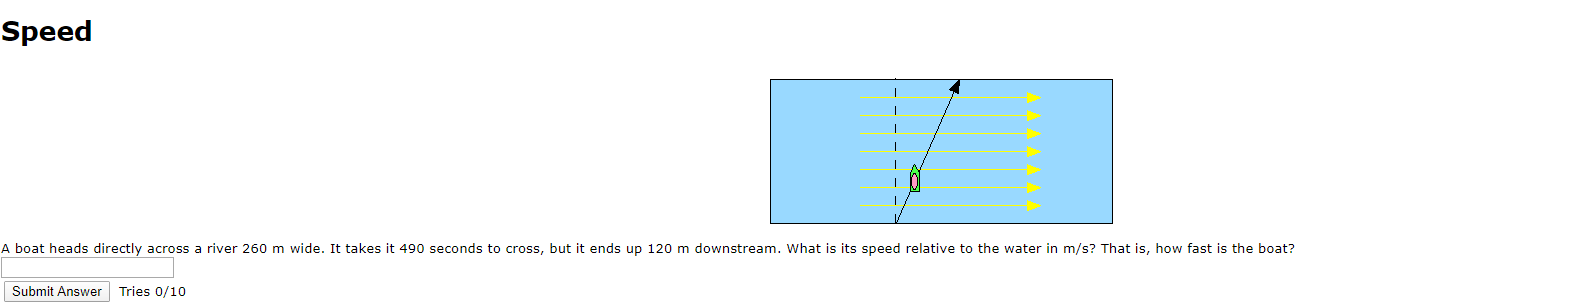 Speed
A boat heads directly across
a river 260
m wide. It takes it 490 seconds to cross, but it ends up 120
m downstream. What is its
speed relative to the water
in m/s? That is, how fast
is the boat?
Submit Answer Tries 0/10
